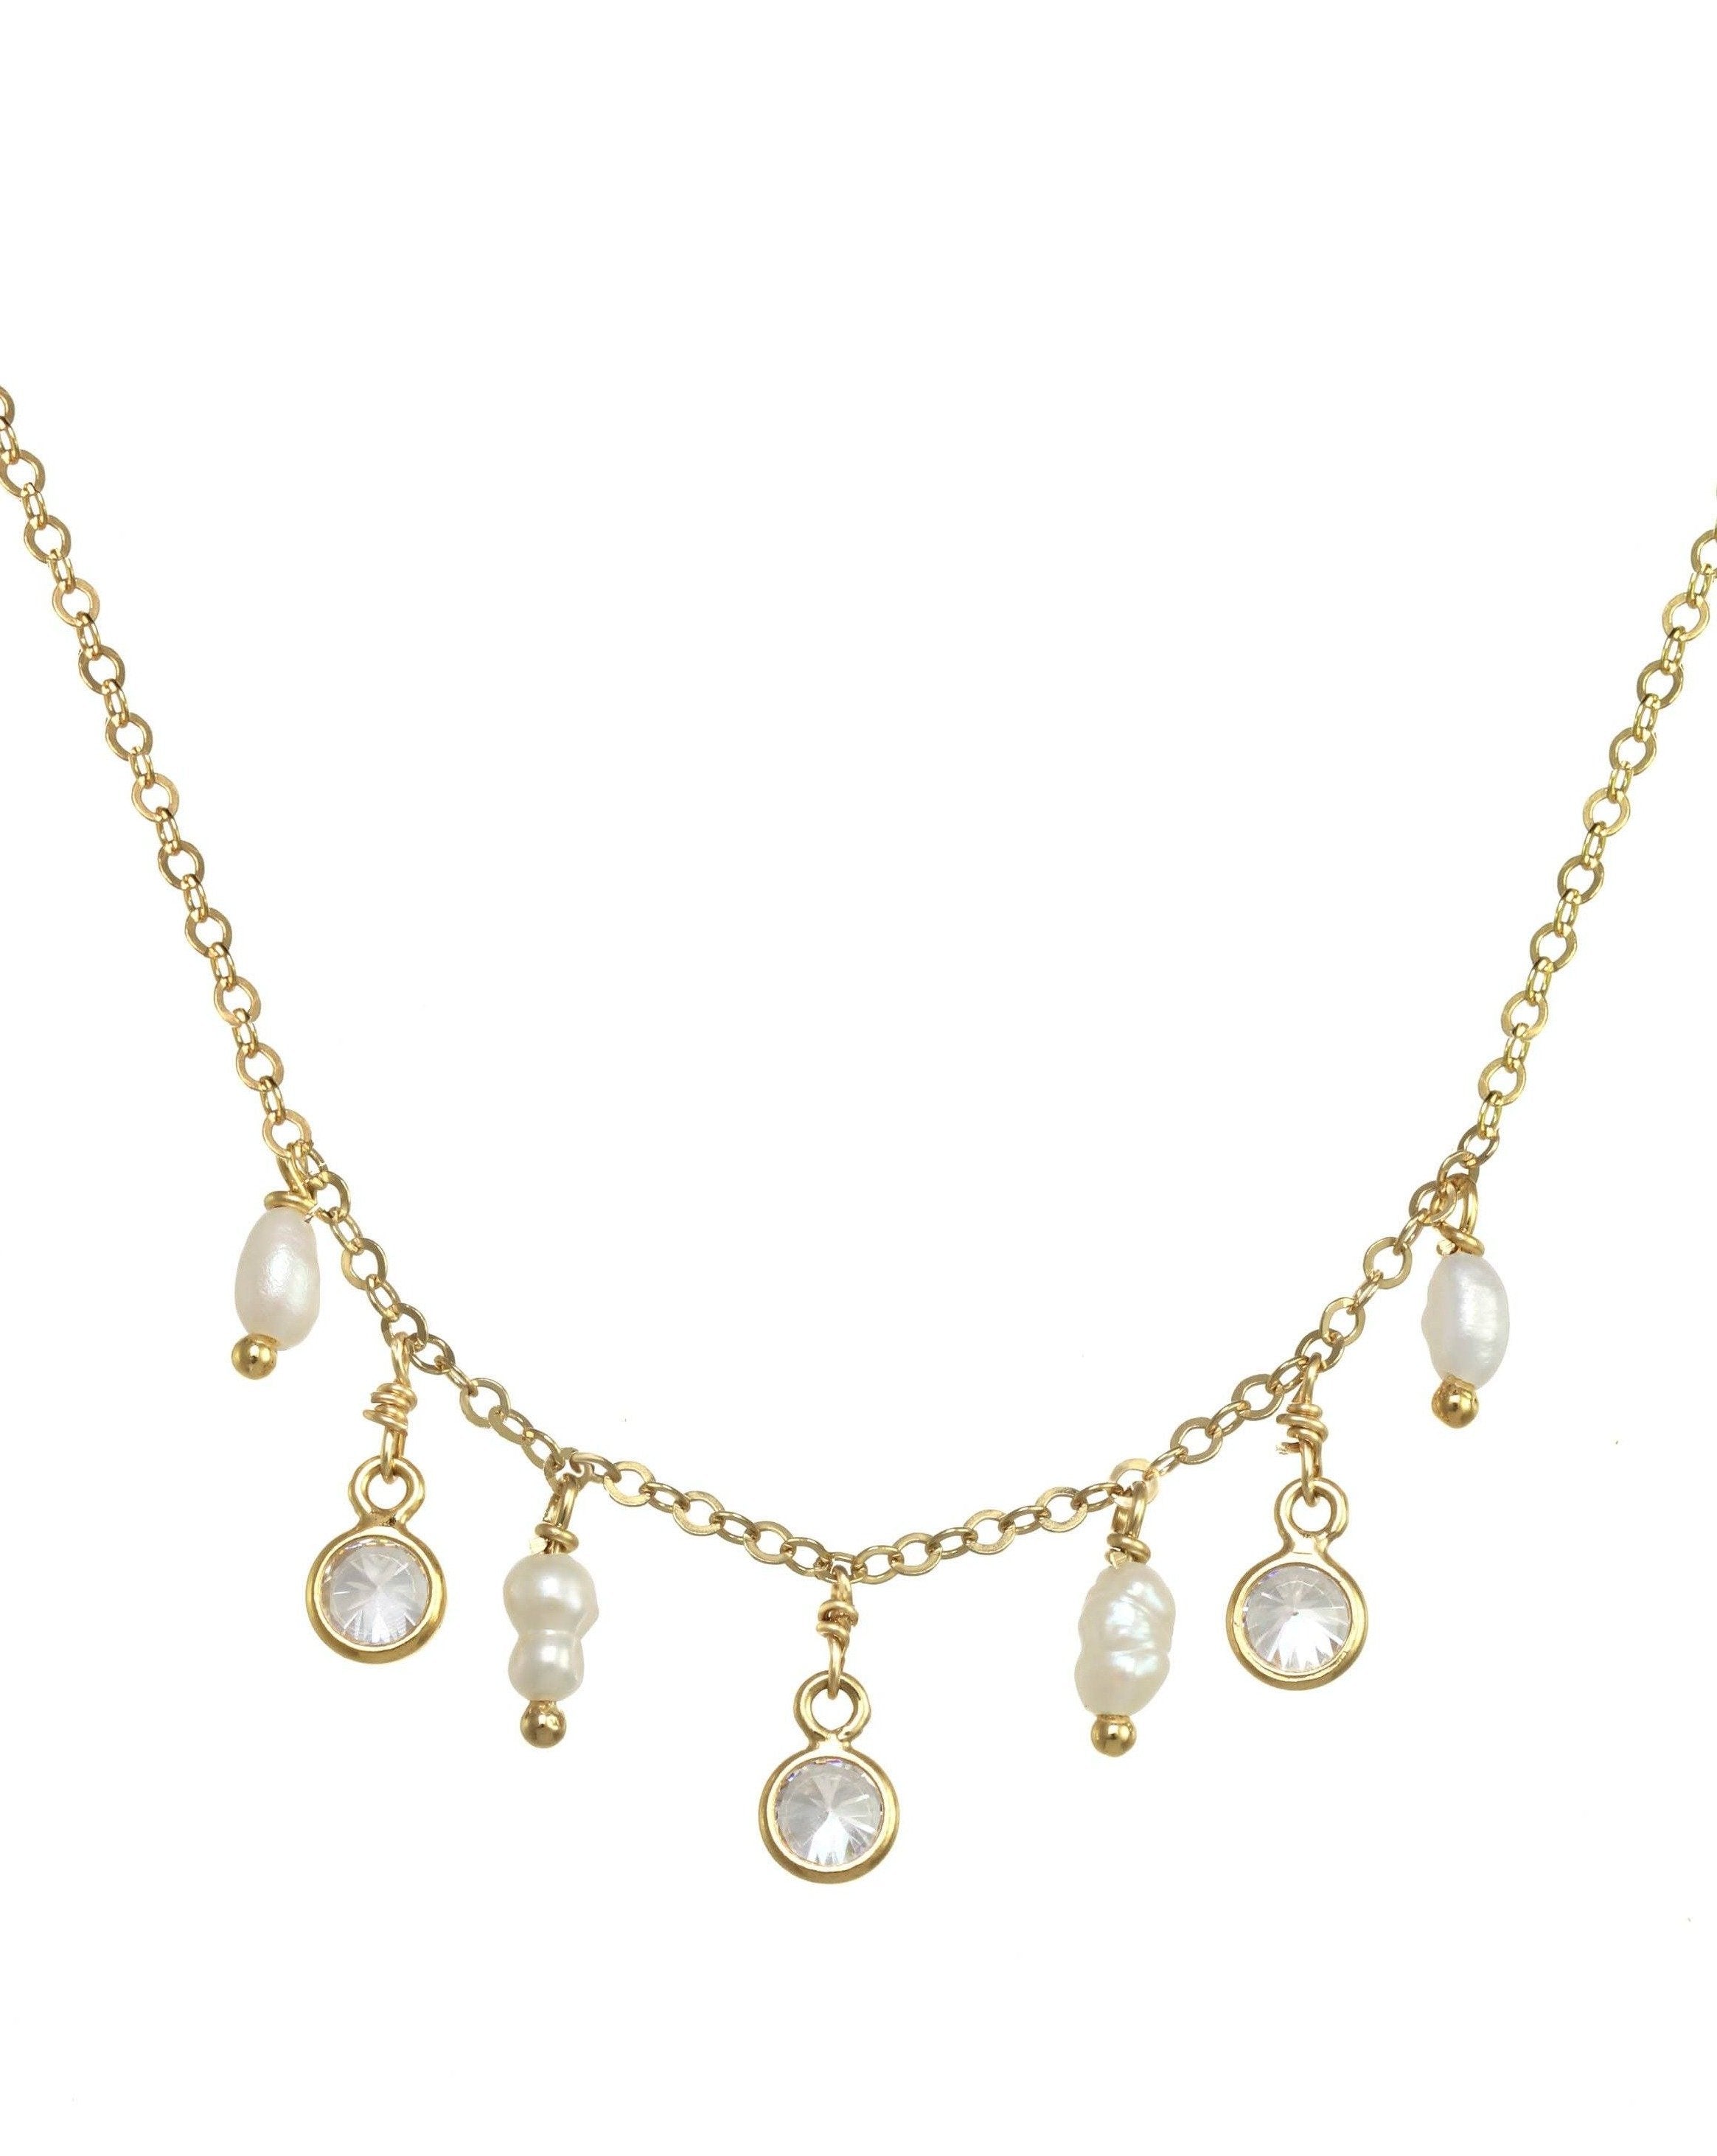 Charita Necklace by KOZAKH. A 16 to 18 inch adjustable length necklace in 14K Gold Filled, featuring 3-4mm Rice Pearls and 3mm Cubic Zirconias.